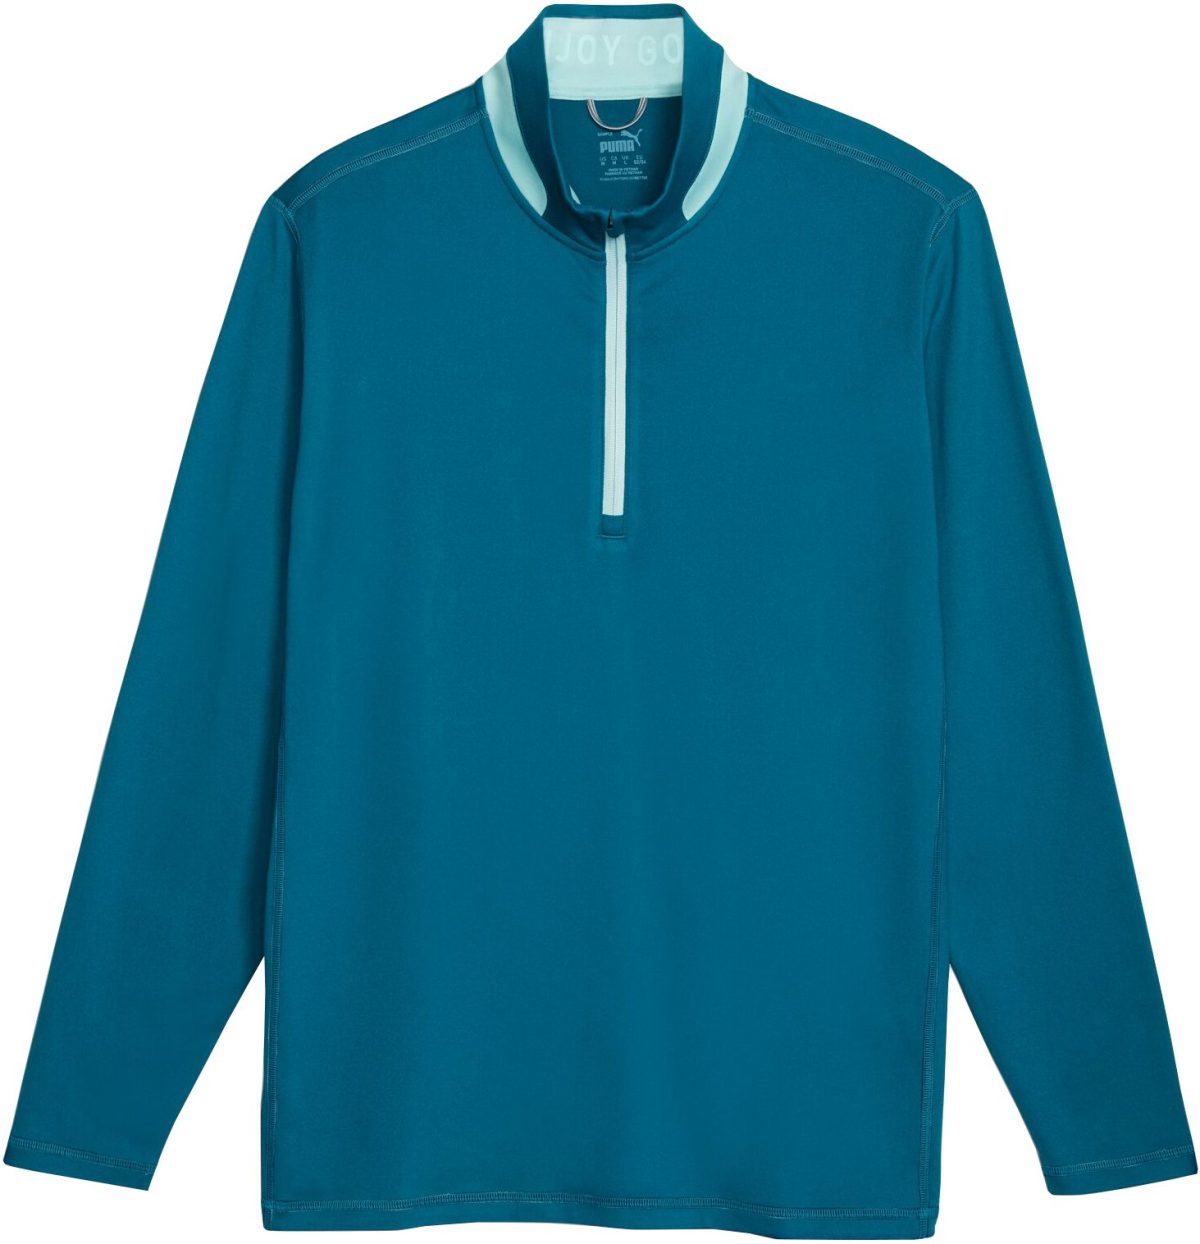 Puma Men's Lightweight 1/4 Zip Golf Pullover, Polyester/Elastane in Pacific Green/Cay, Size M